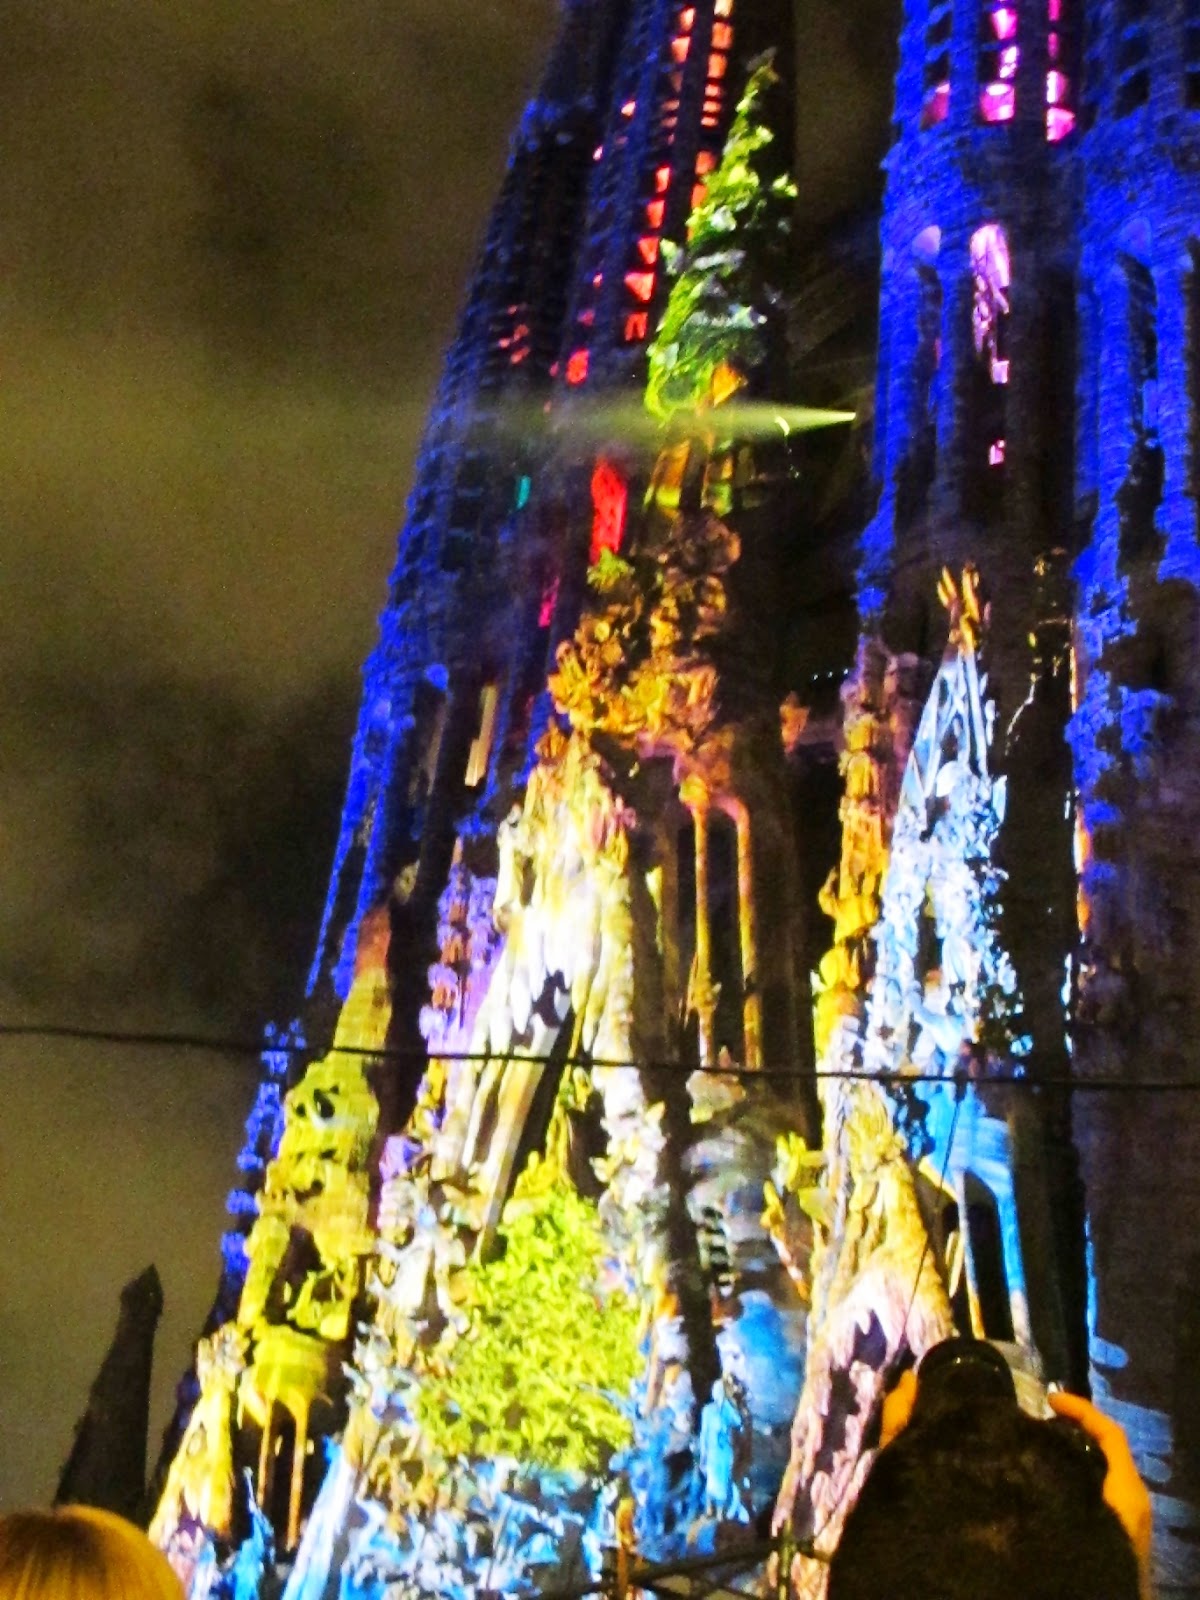 Barcelona Besotted: ...because they light up the Sagrada Familia to music..